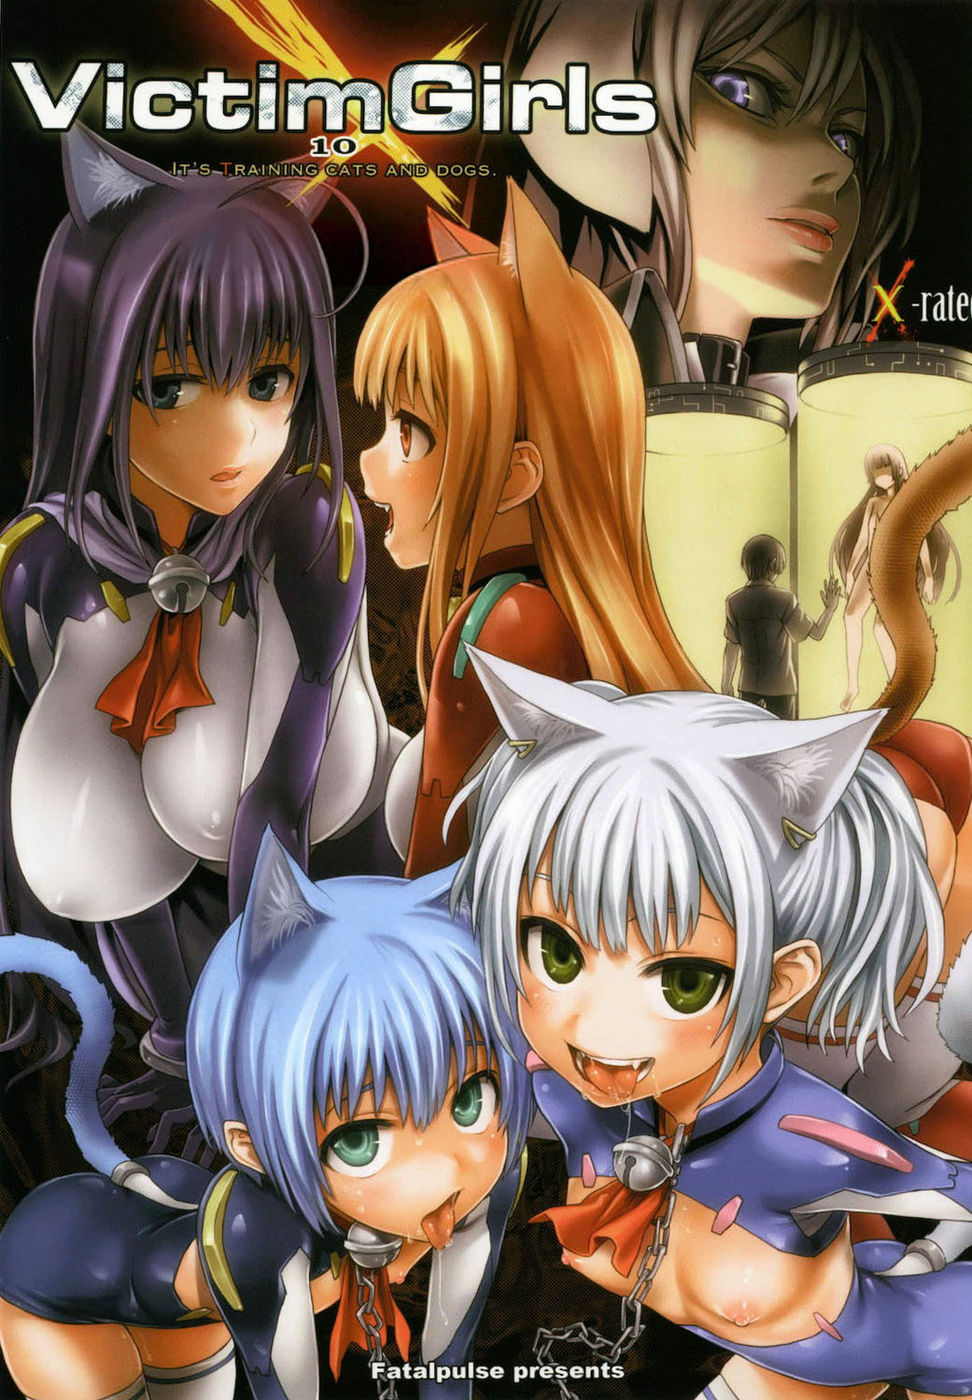 Anime Cat Hentai Porn Comics - Victim Girls 10 - It's Training Cats And Dogs-Read-Hentai Manga Hentai Comic  - Online porn video at mobile